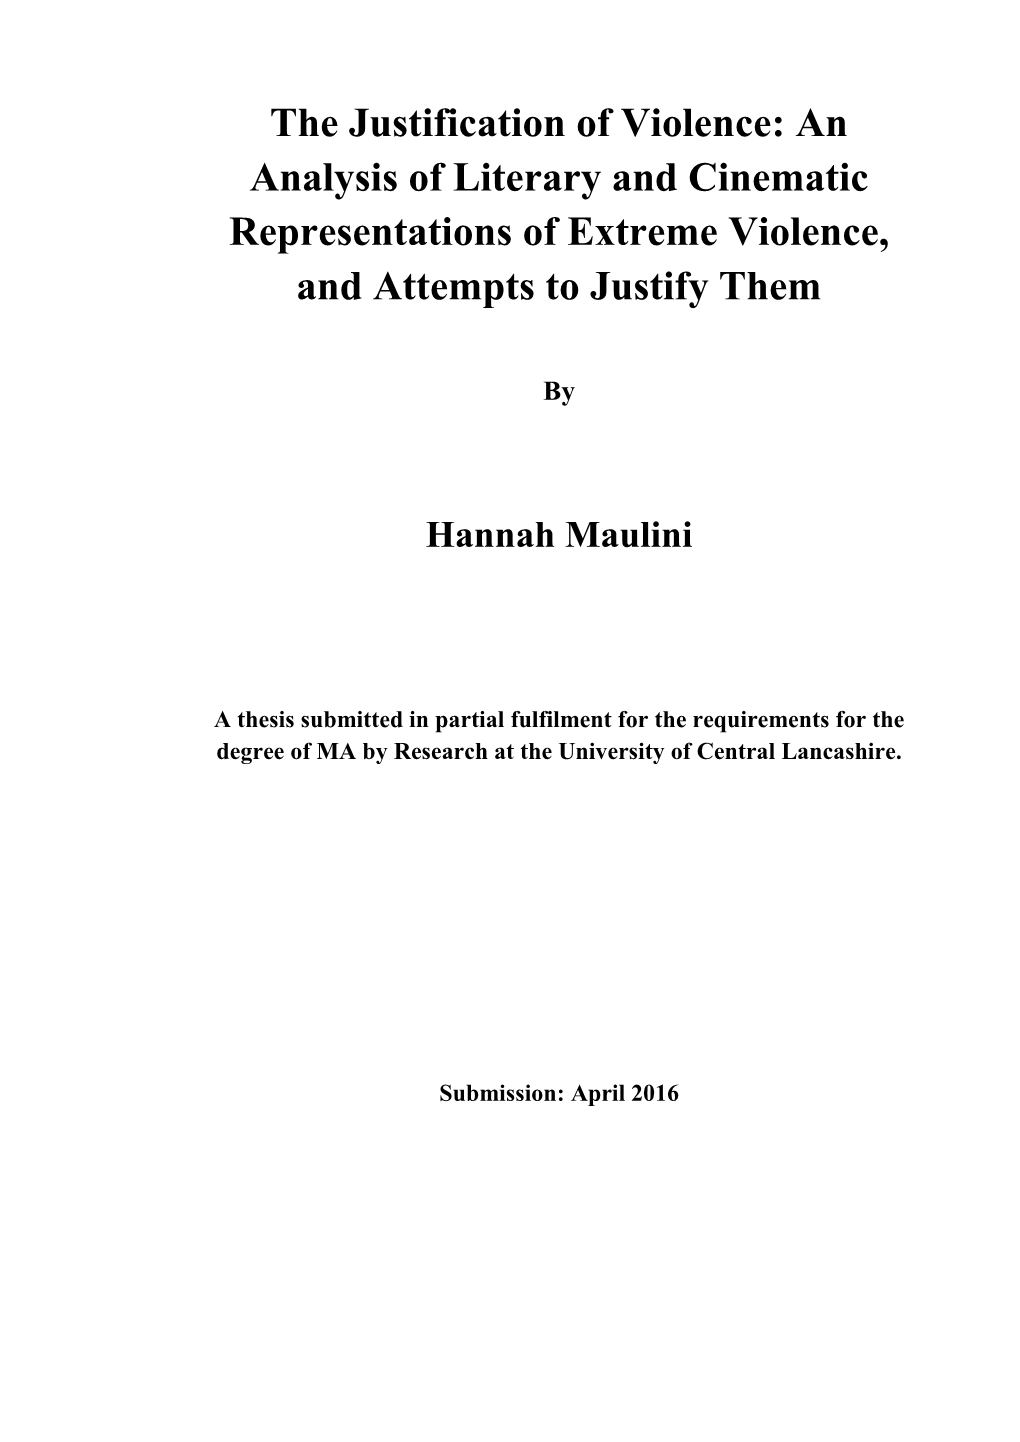 An Analysis of Literary and Cinematic Representations of Extreme Violence, and Attempts to Justify Them